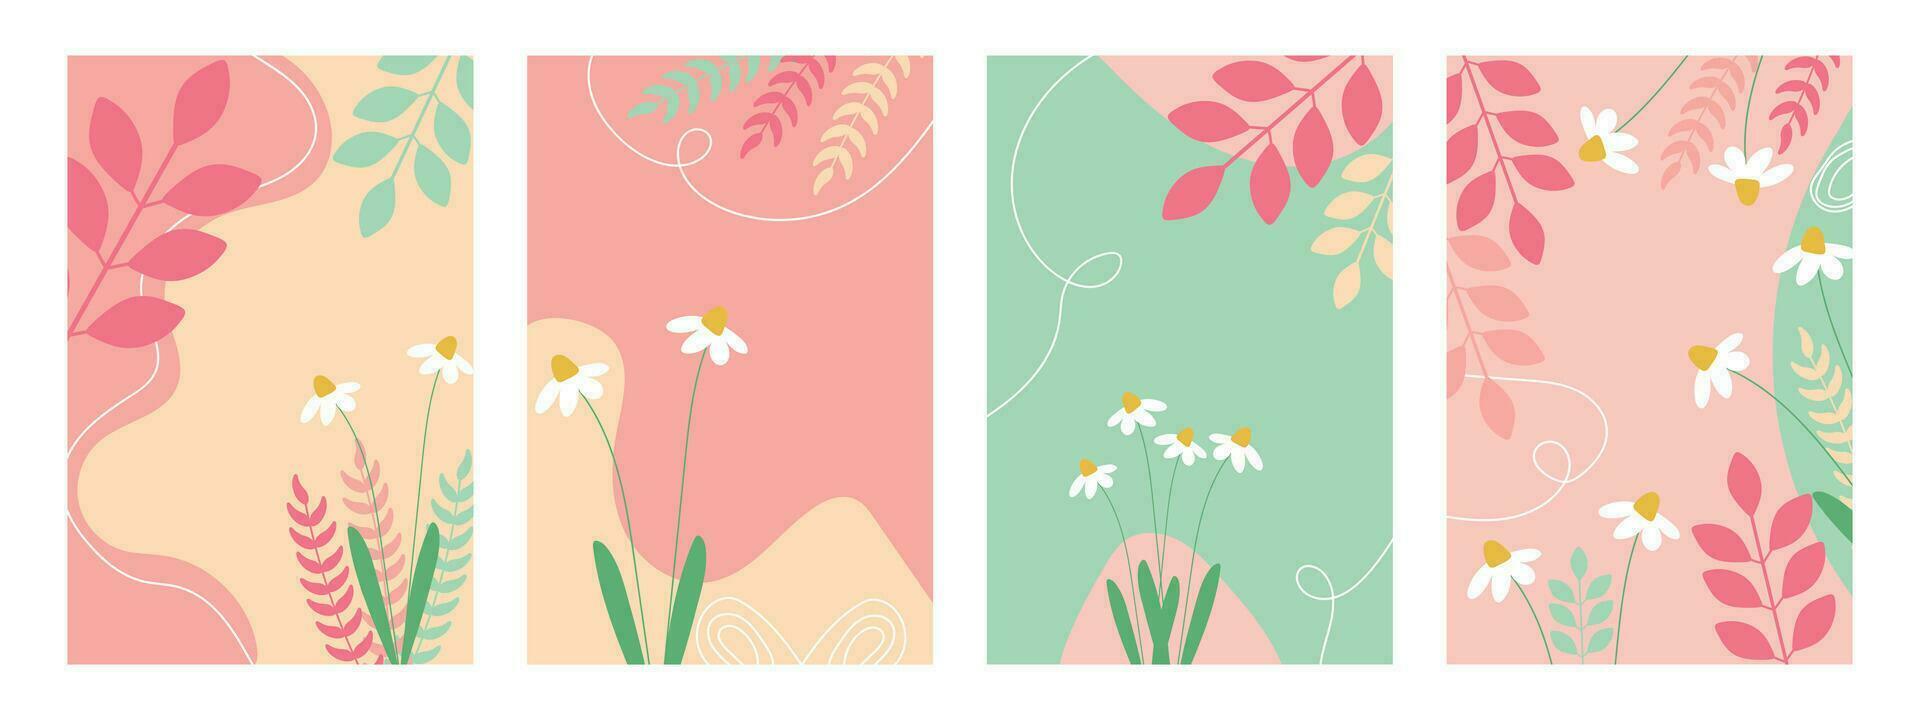 Set of cute floral backgrounds. Covers with daisies. Templates with flowers. vector